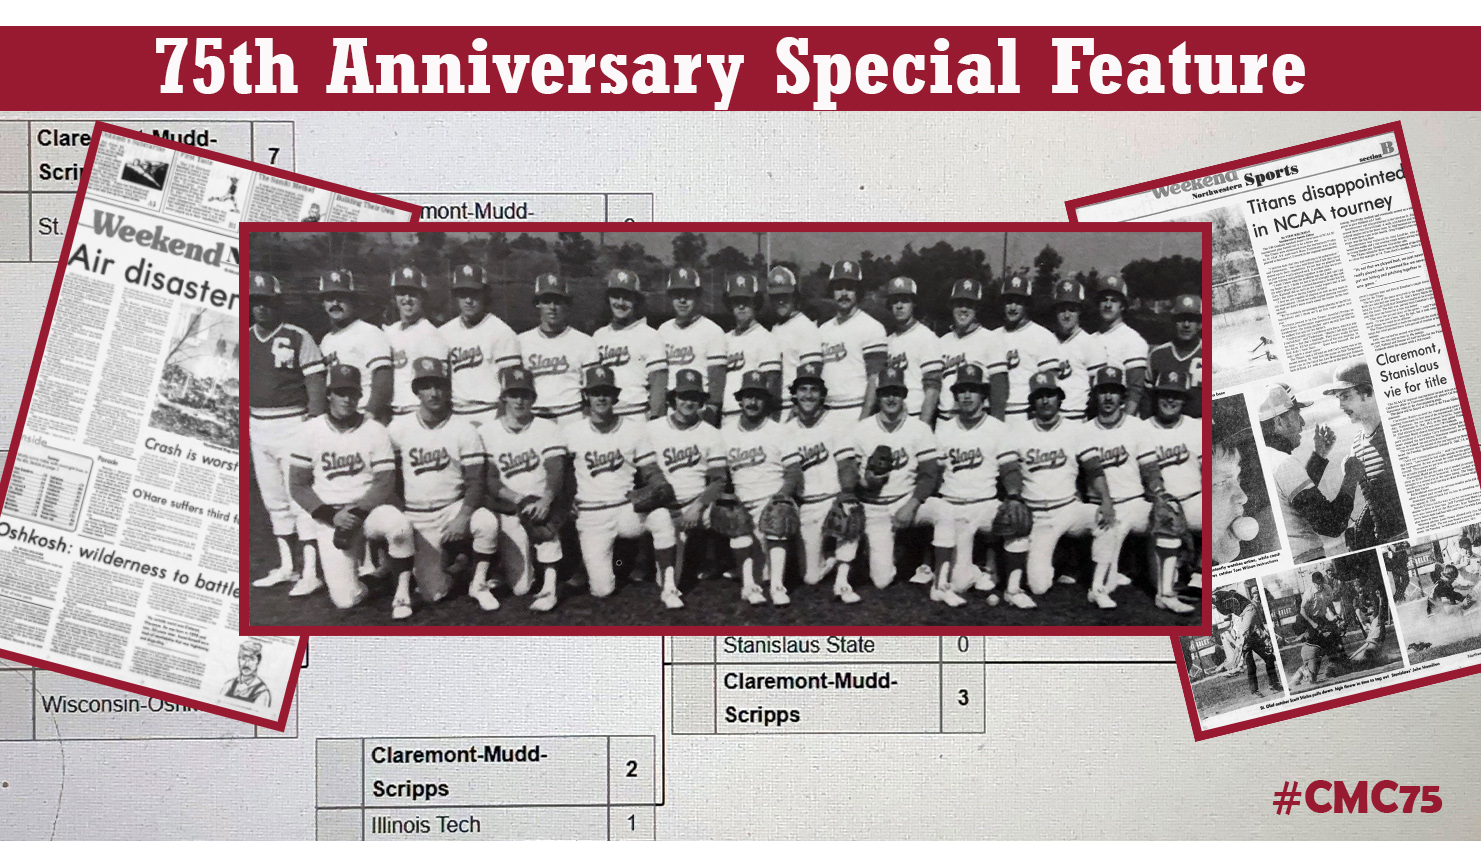 A photo of the 1979 CMS baseball team, as well as photos of the front and back page of the Oshkosh newspaper from May 26, 1979 with the front showing news of a plane crash and the back showing Claremont in the baseball championship game. Words over the photo read: 75th Anniversary Special Feature